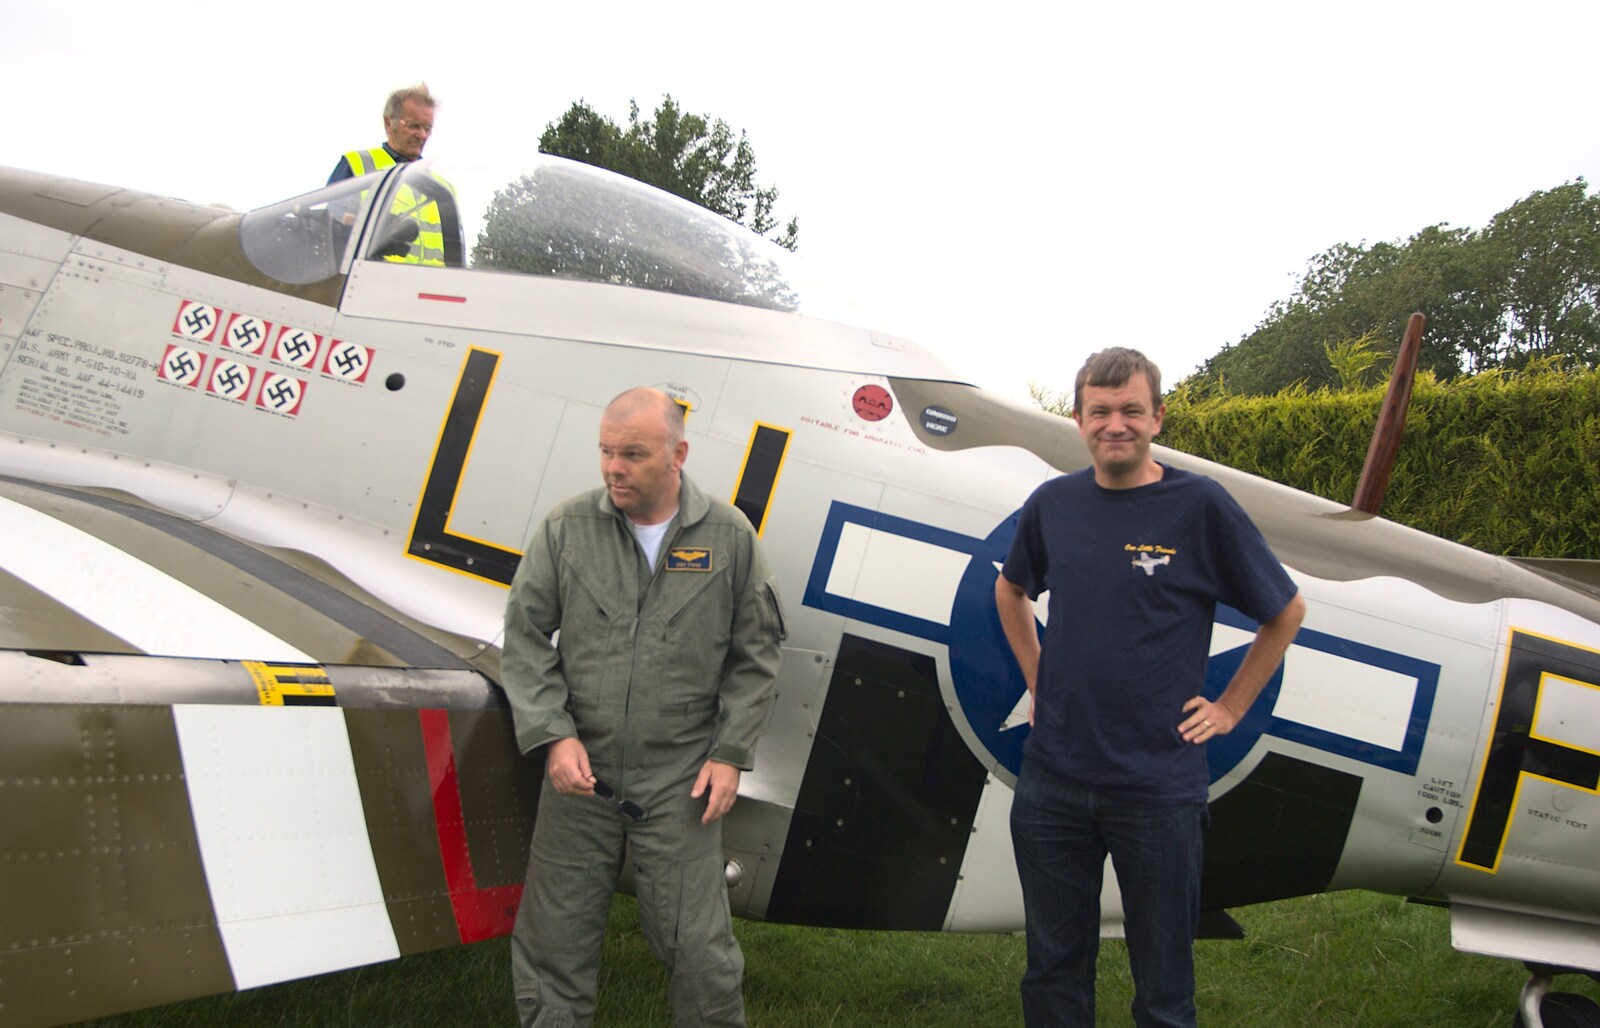 Dave and Nosher before the off from Nosher Flies in a P-51D Mustang, Hardwick Airfield, Norfolk (and the Whole of Suffolk) - 17th July 2011